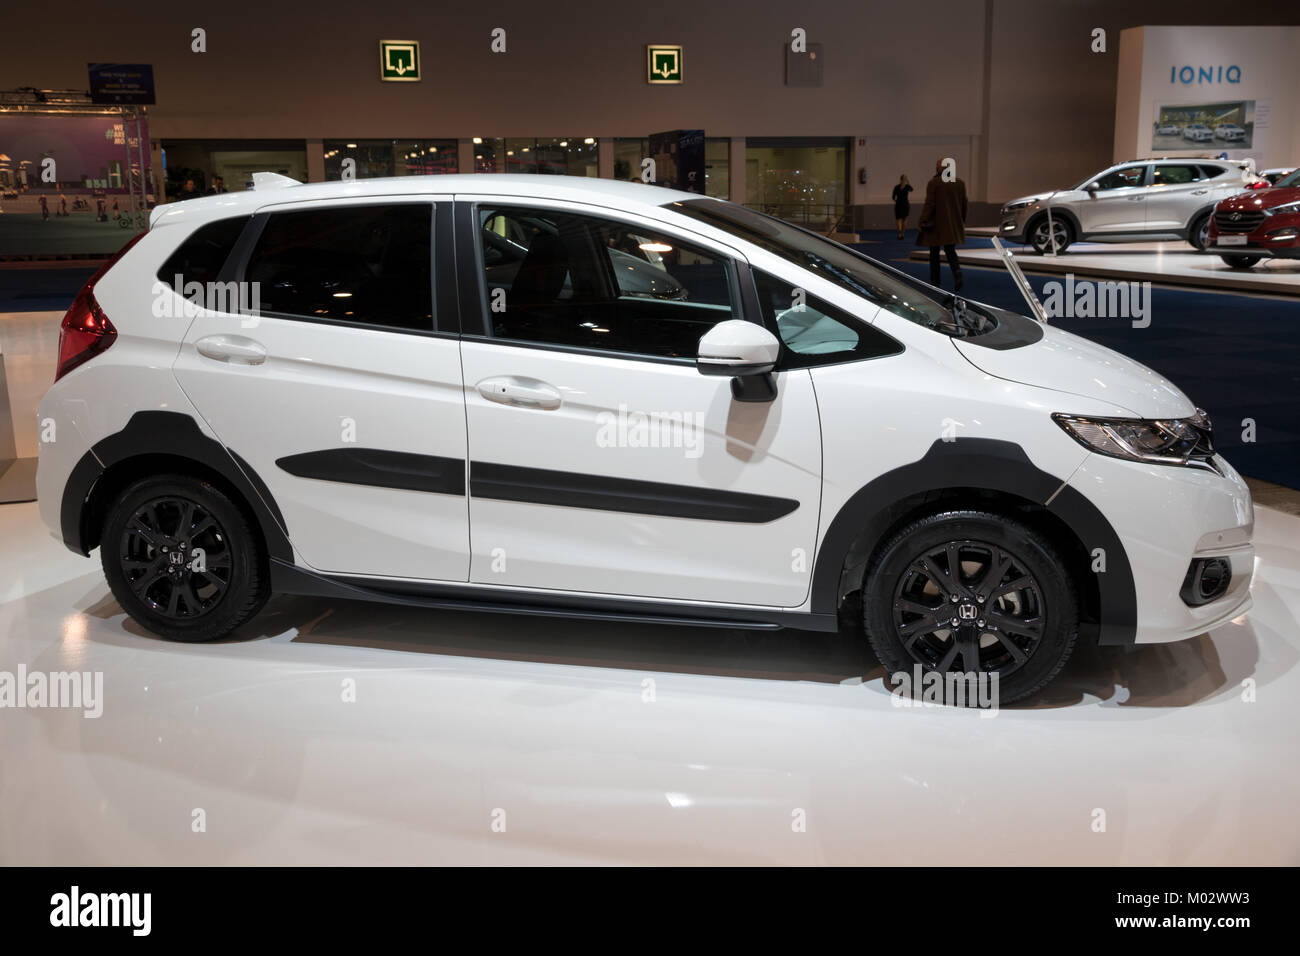 BRUSSELS - JAN 10, 2018: Honda Jazz car showcased at the Brussels Motor Show. Stock Photo